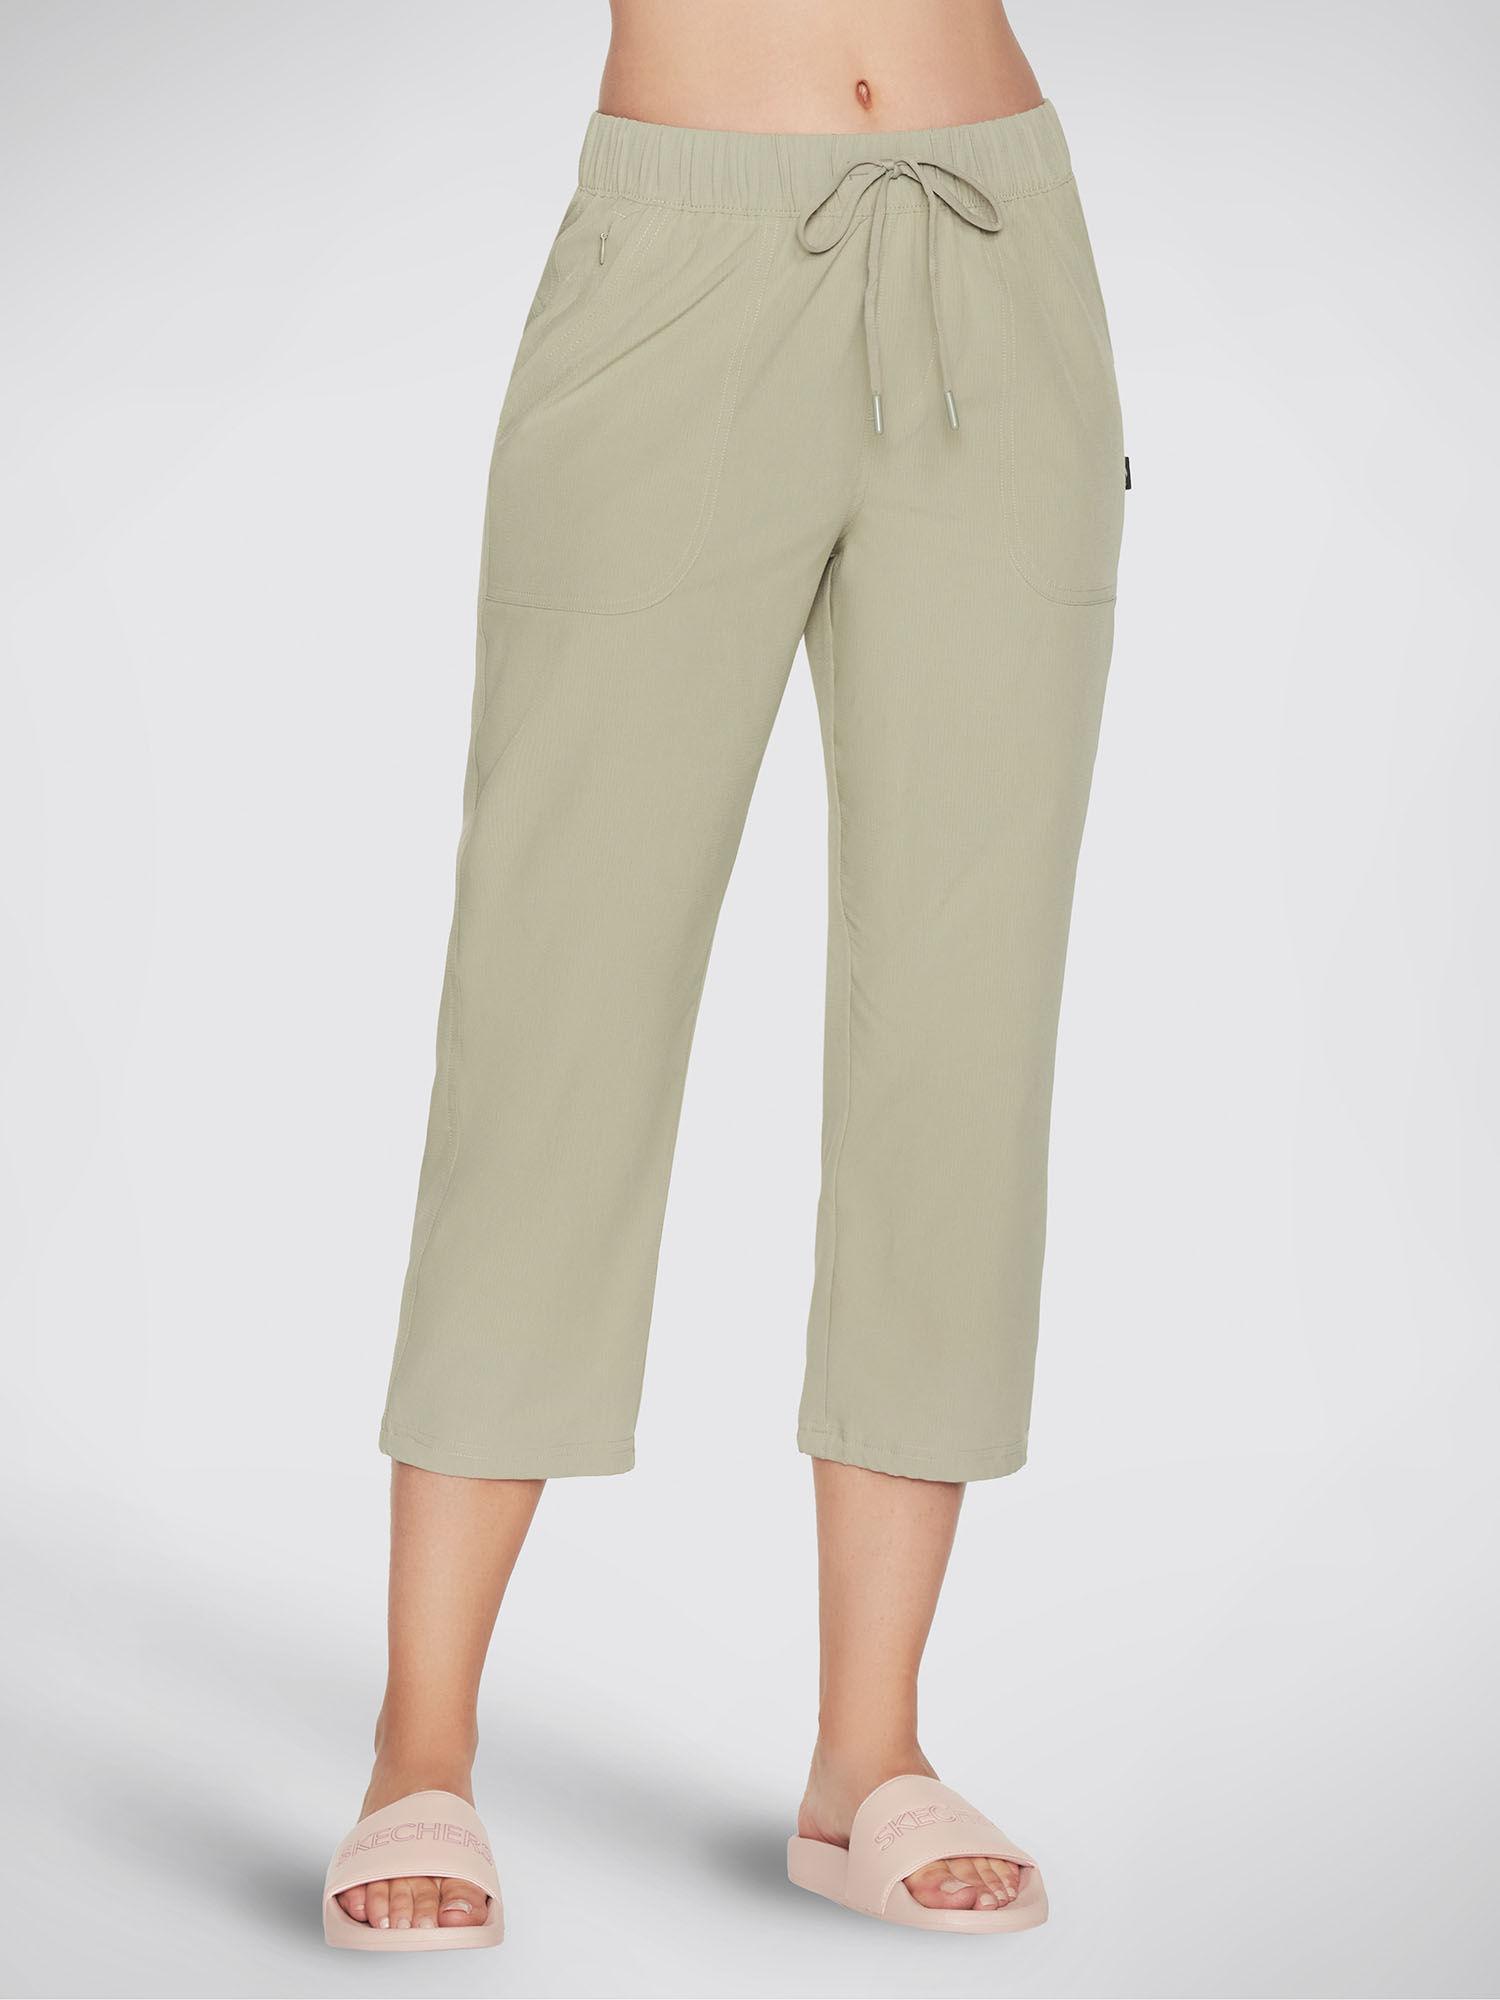 incline-midcalf-pant